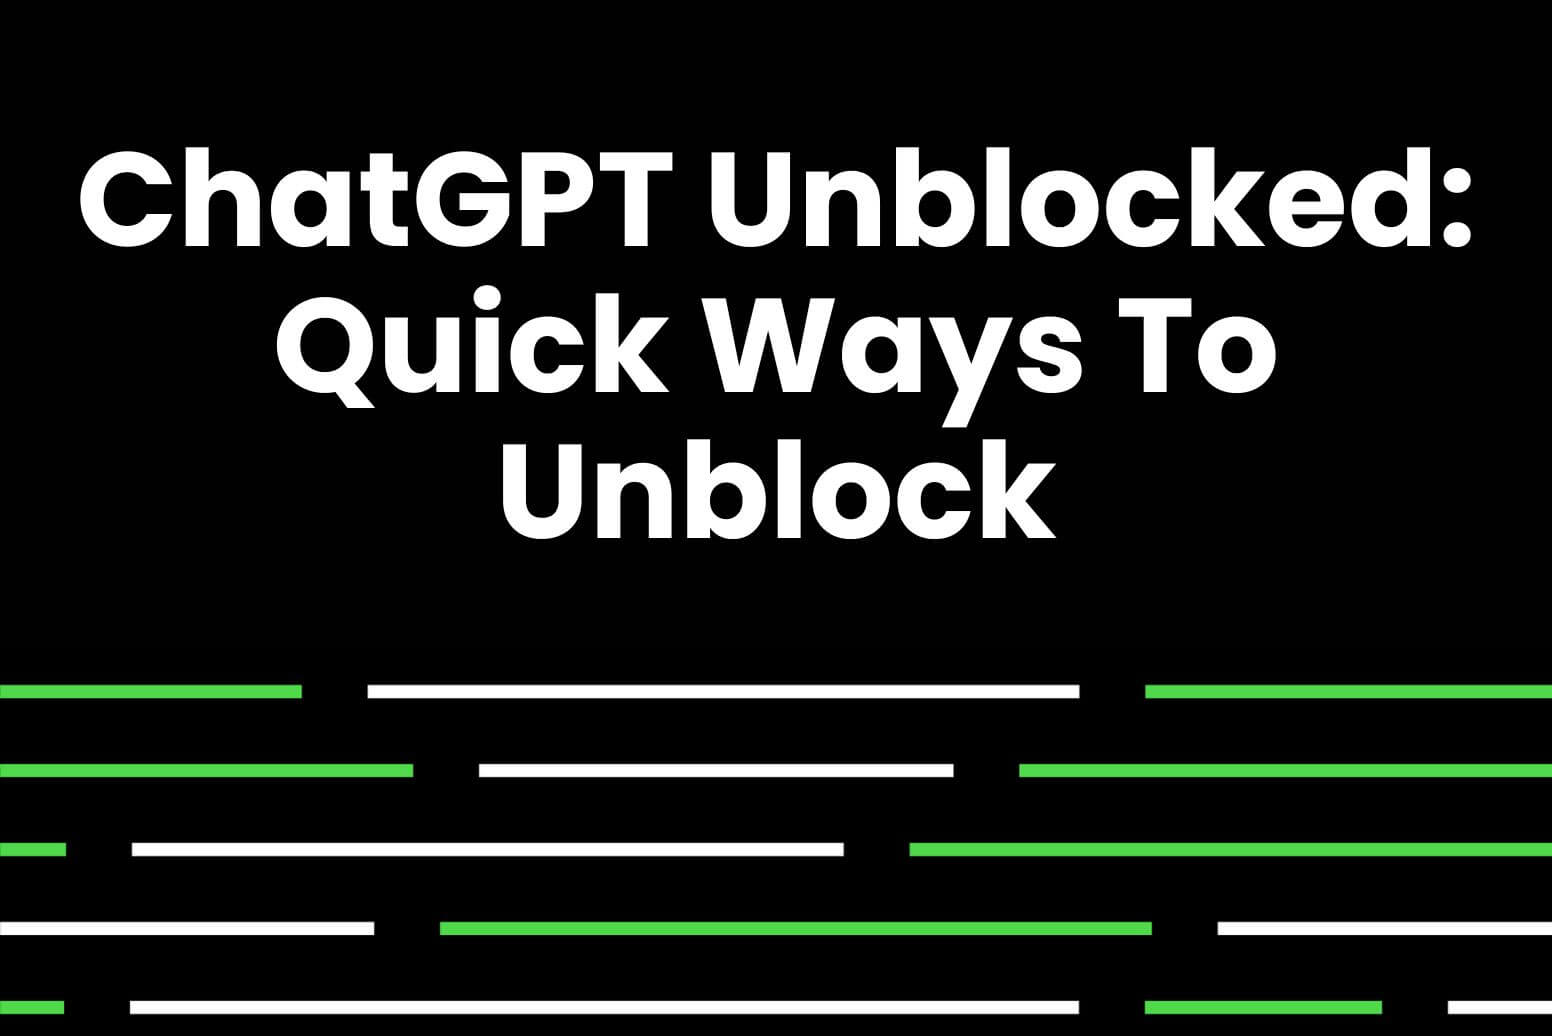 ChatGPT Unblocked-Quick Ways To Unblock